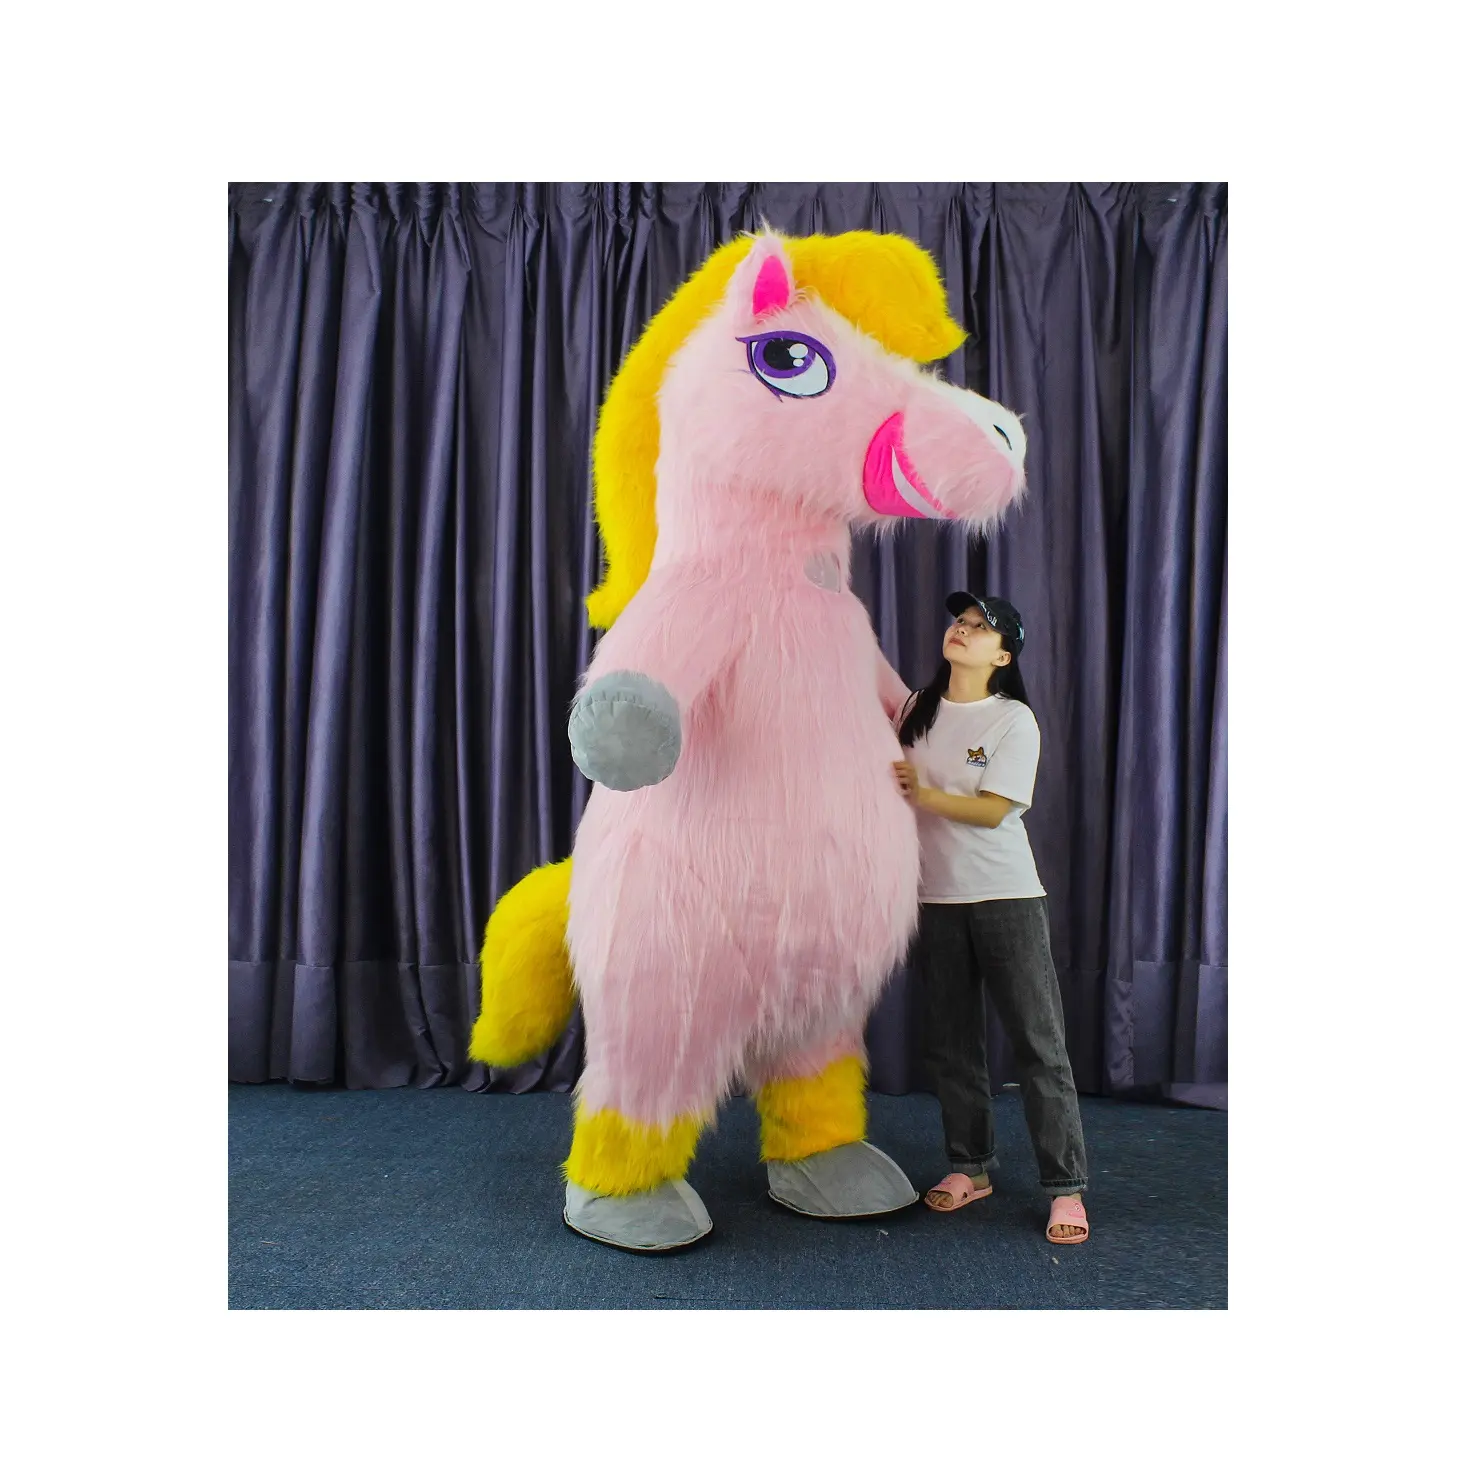 Cartoon Character Mascot Costume 2m High Inflatable Little Pony horse Mascot Unicorn inflatable costume for sale